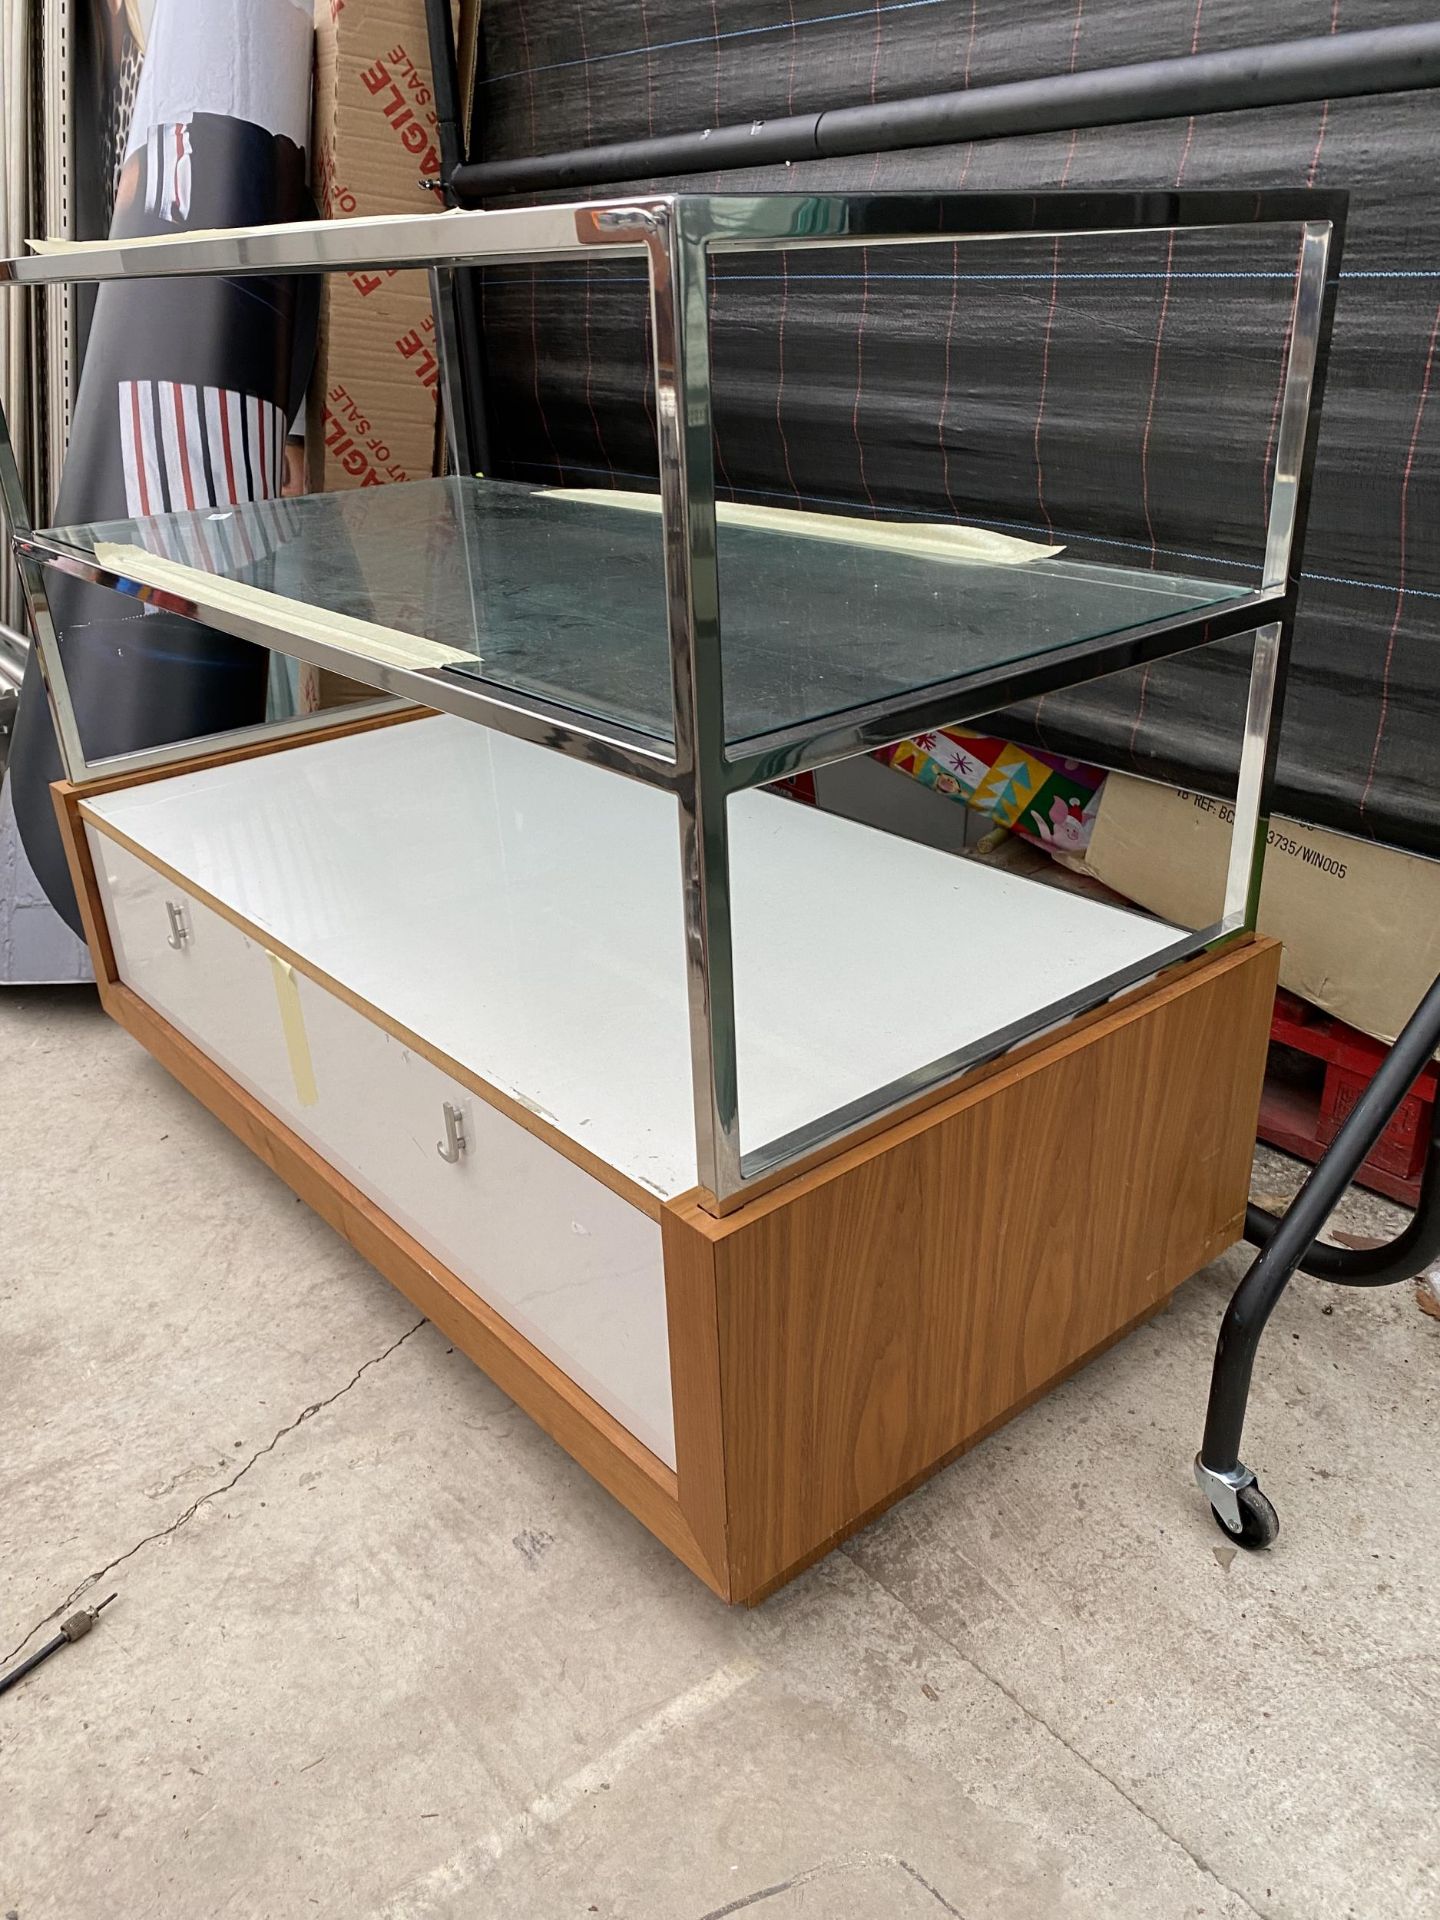 A GLASS SHOP DISPLAY UNIT AND A METAL CLOTHES RAIL - Image 3 of 4